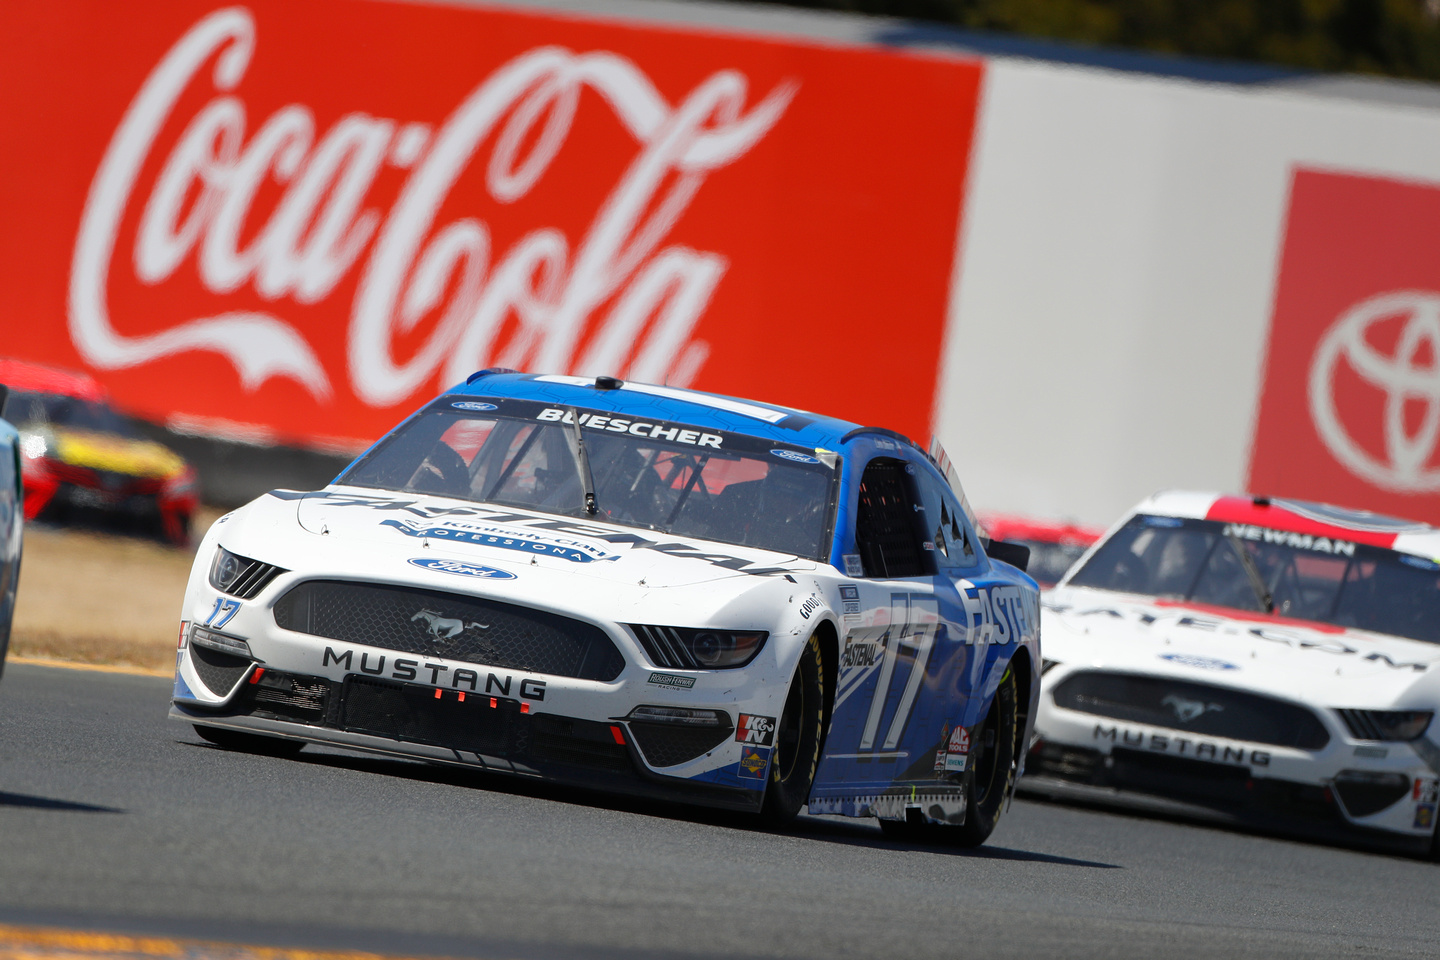 Buescher Finishes 16th in Wild Sonoma Ending